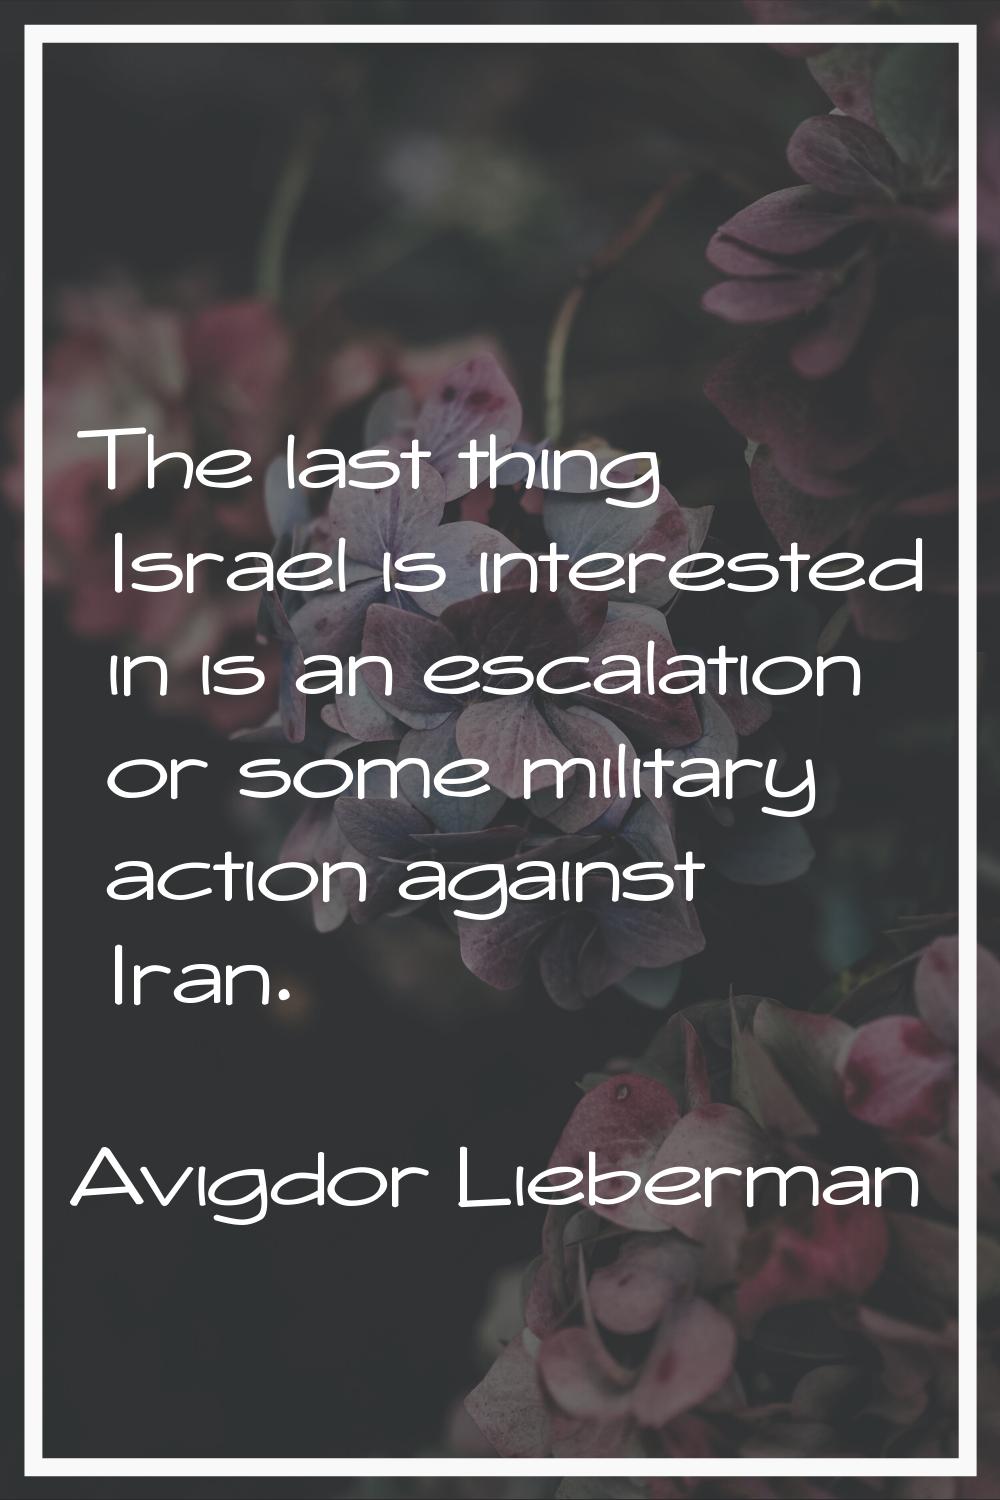 The last thing Israel is interested in is an escalation or some military action against Iran.